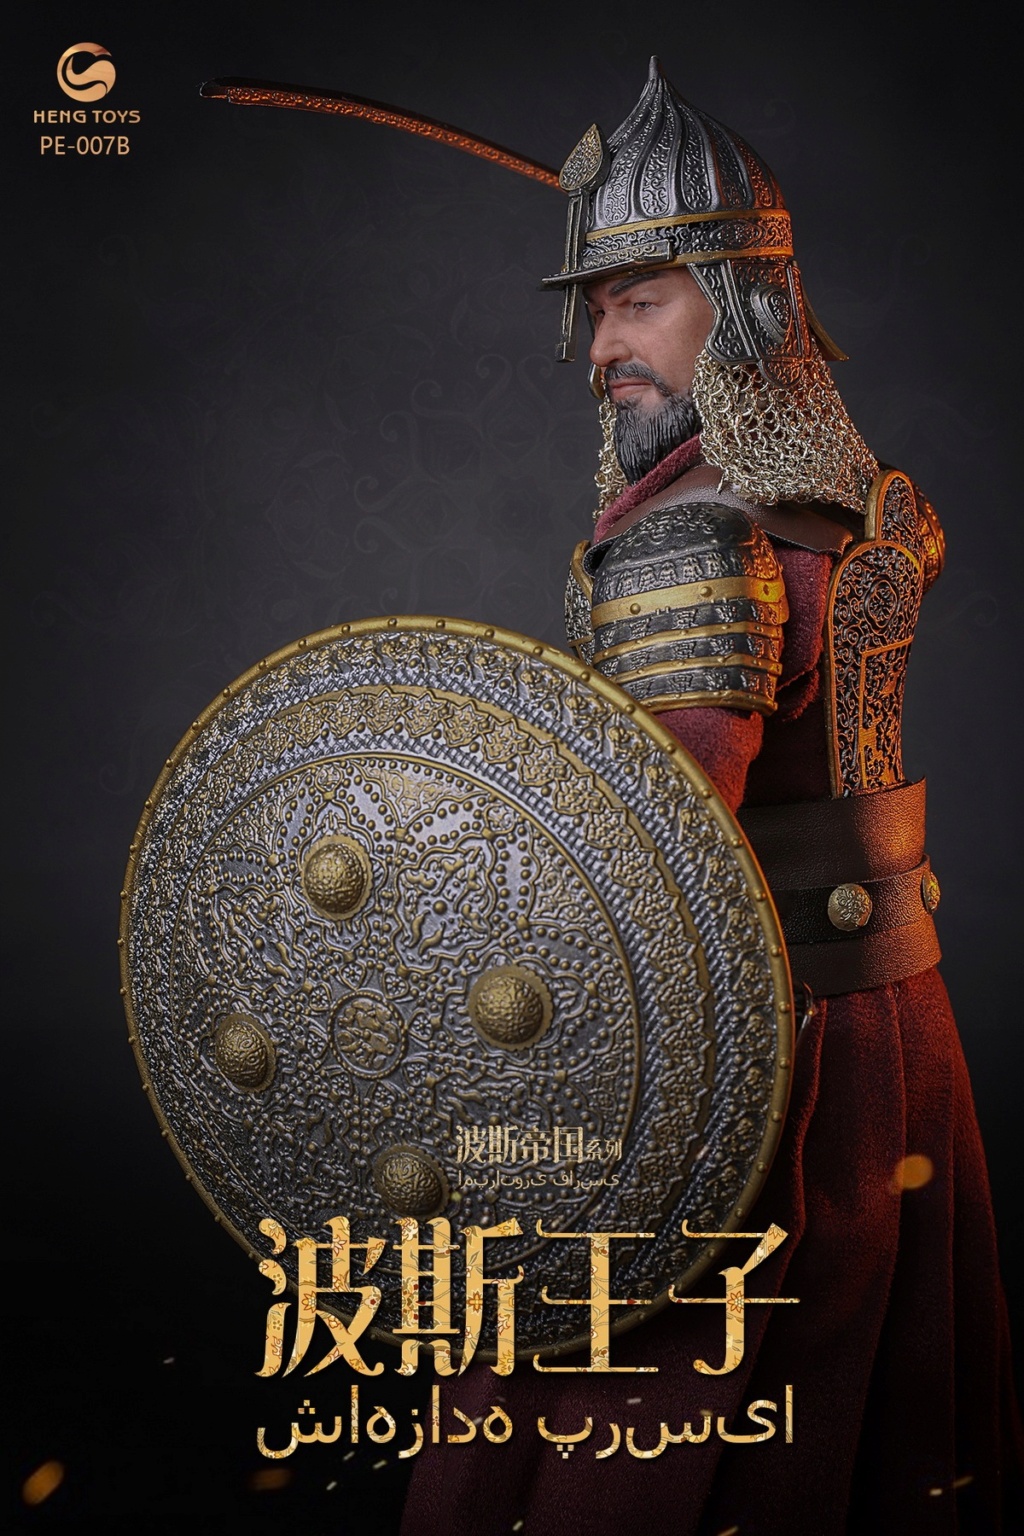 PersianEmpire - NEW PRODUCT: HengToys: 1/6 Persian Empire Series-Prince of Persia [A & B Section] (#PE-007) 16040810